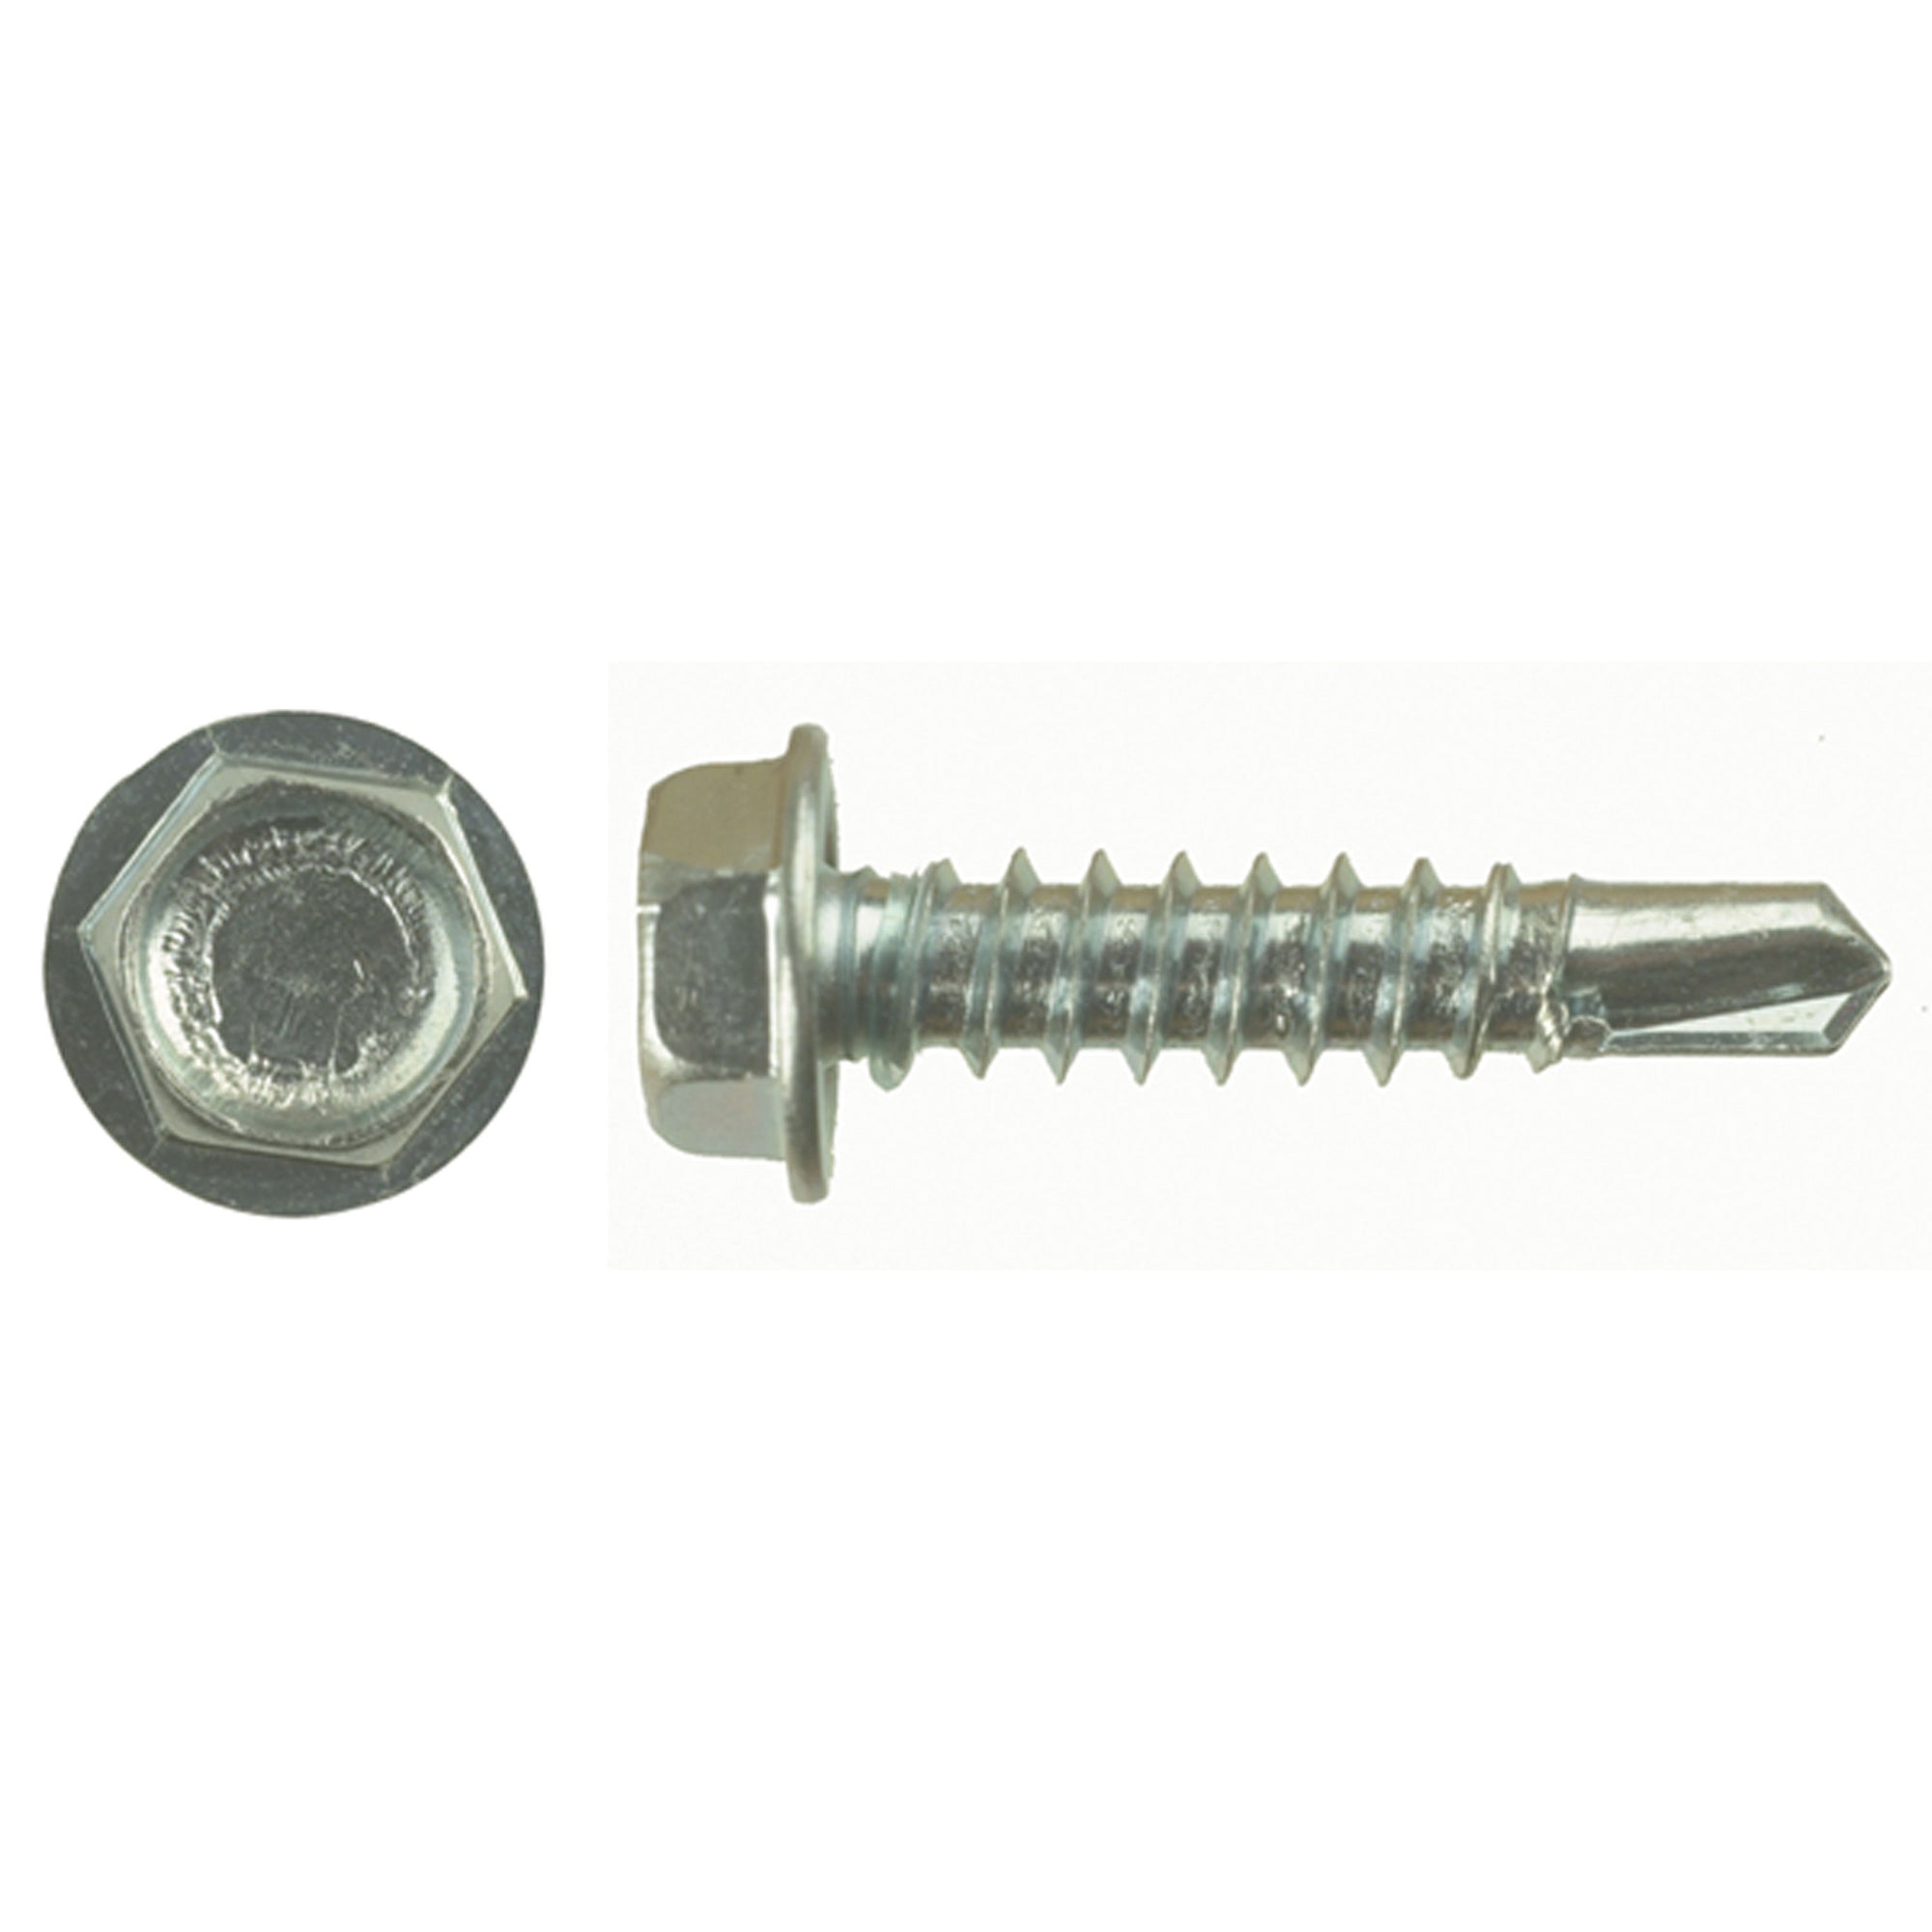 AP Products 012-DP500 8 X 1- 1/2 Self-Tapping 1/4" Hex Head Screw, Pack of 500 - 1-1/2"